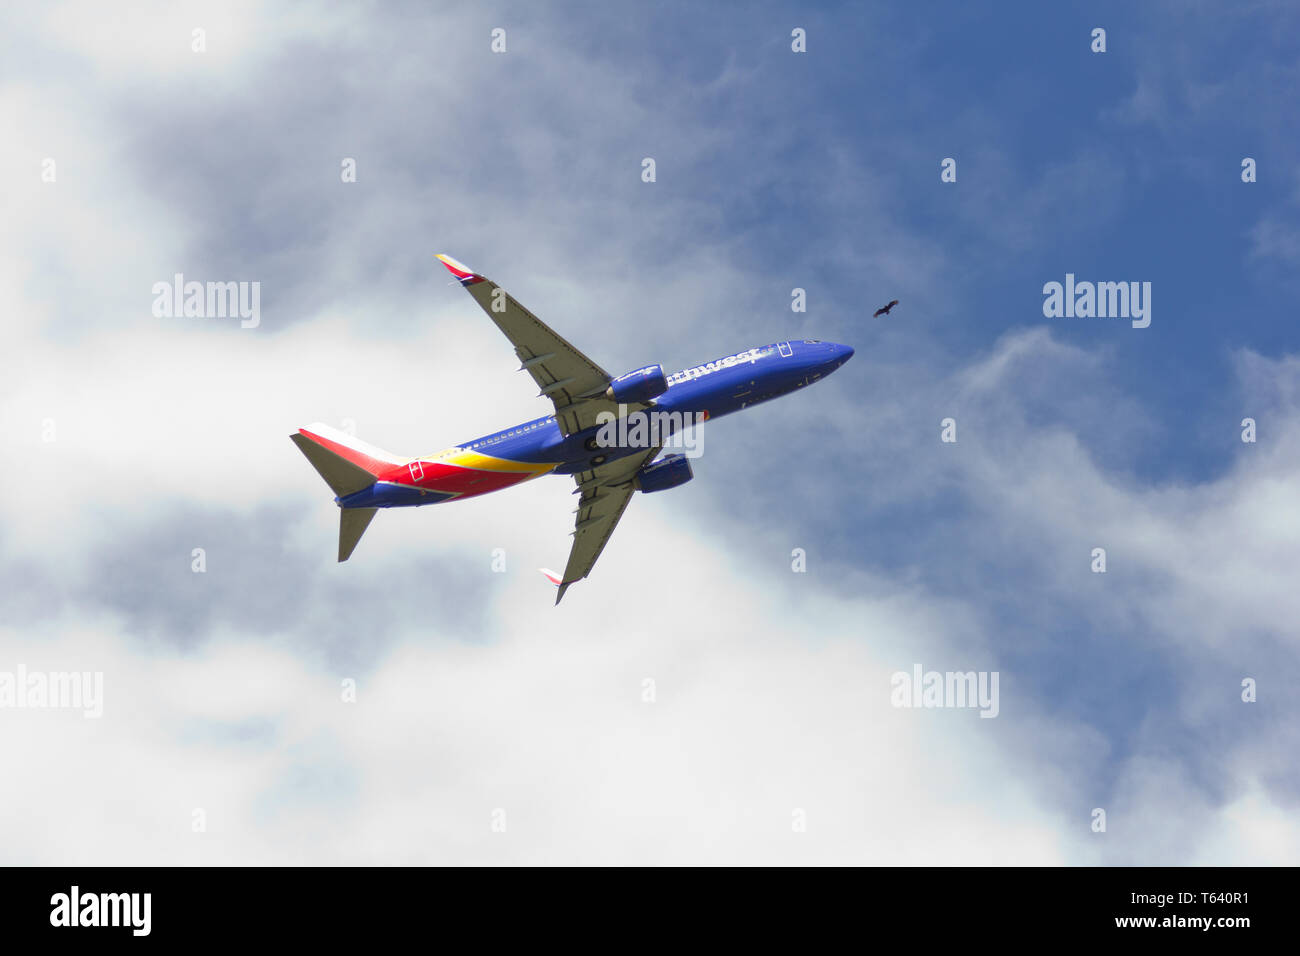 Southwest Airlines Flight Number WN4266 (Tail Number N8656B) taking off from Baltimore/Washington International Thurgood Marshall Airport (BWI) on 20 April 2019, as viewed from Glen Burnie, Maryland; its nose looking to be headed straight toward a soaring bird, possibly a turkey vulture. The plane, scheduled to depart for Las Vegas, Nevada at 3:45 P.M. EDT, is pictured at 3:48 P.M. EDT, against blue sky and fair weather cumulus clouds. Per the U.S. Federal Aviation Administration, there have been four 'wildlife strikes' this year between birds and airplanes/aeroplanes at BWI as of 28 February. Stock Photo